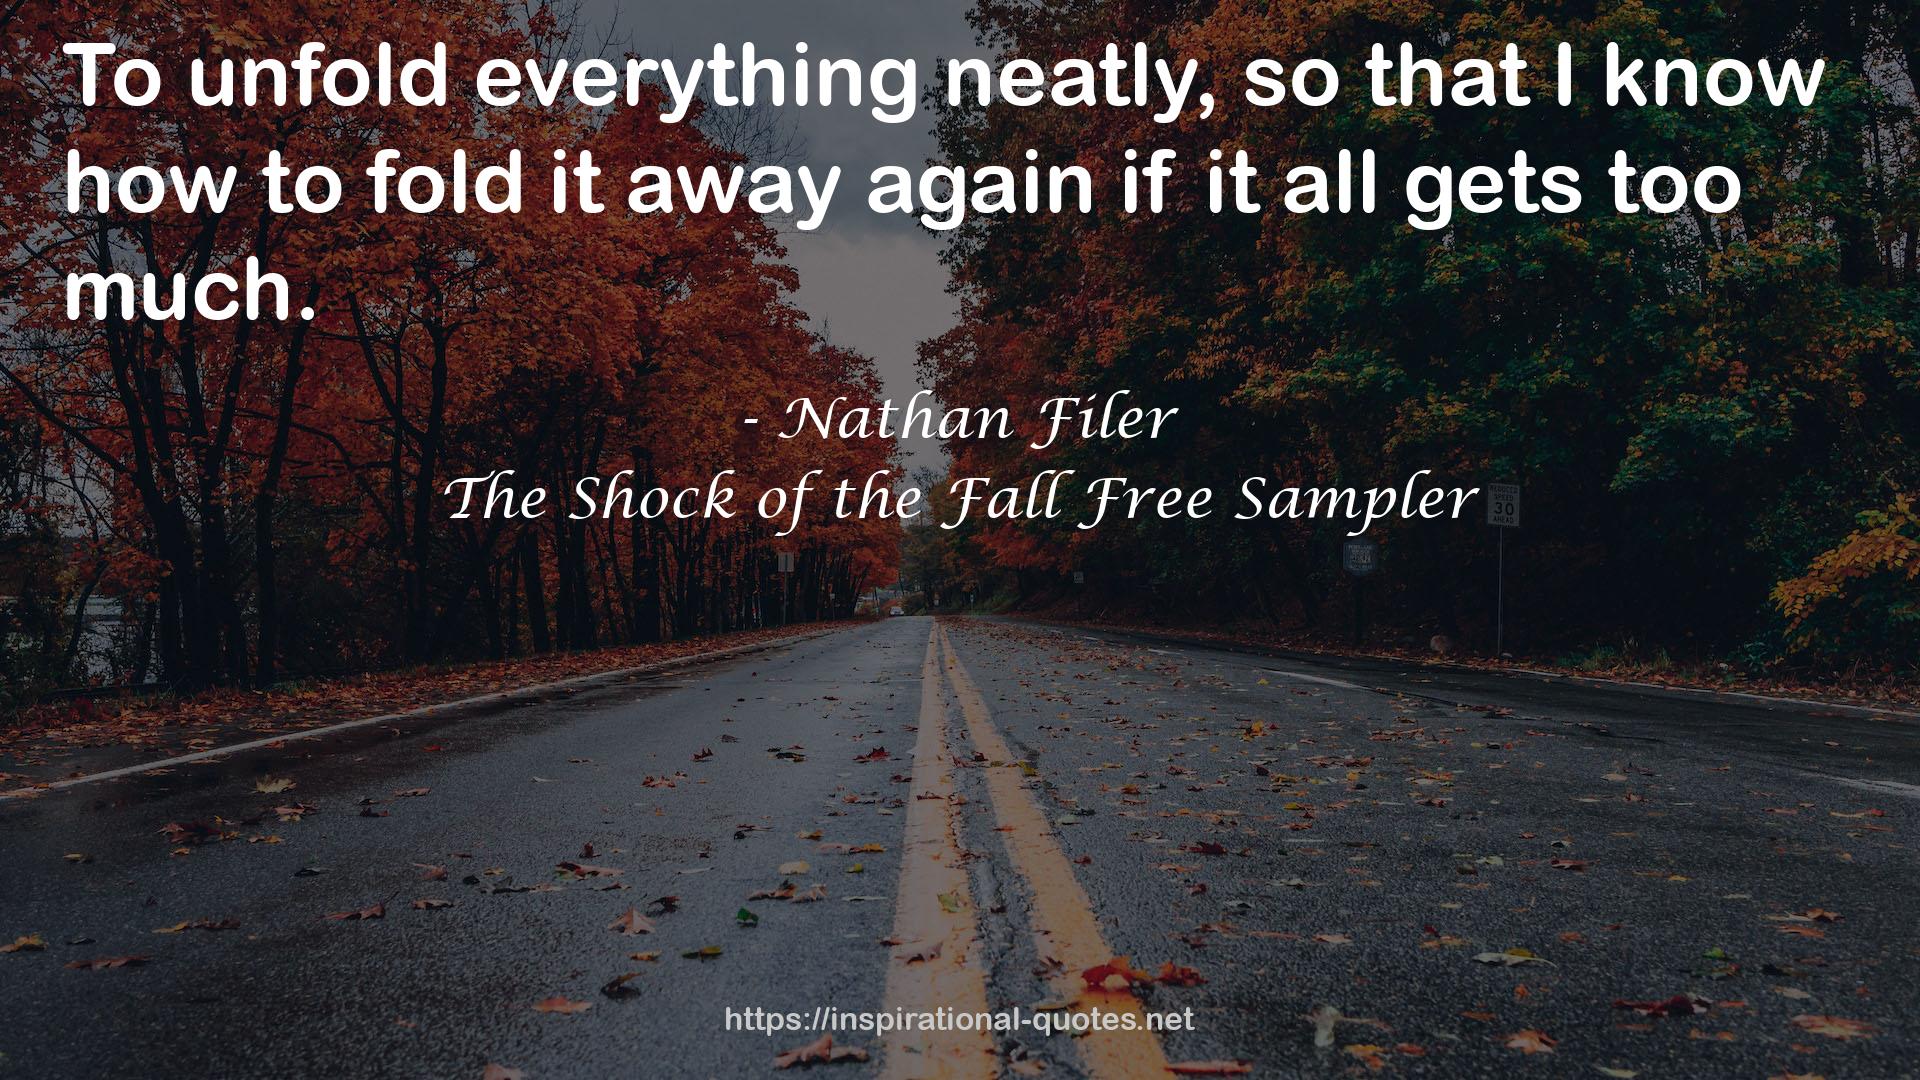 The Shock of the Fall Free Sampler QUOTES